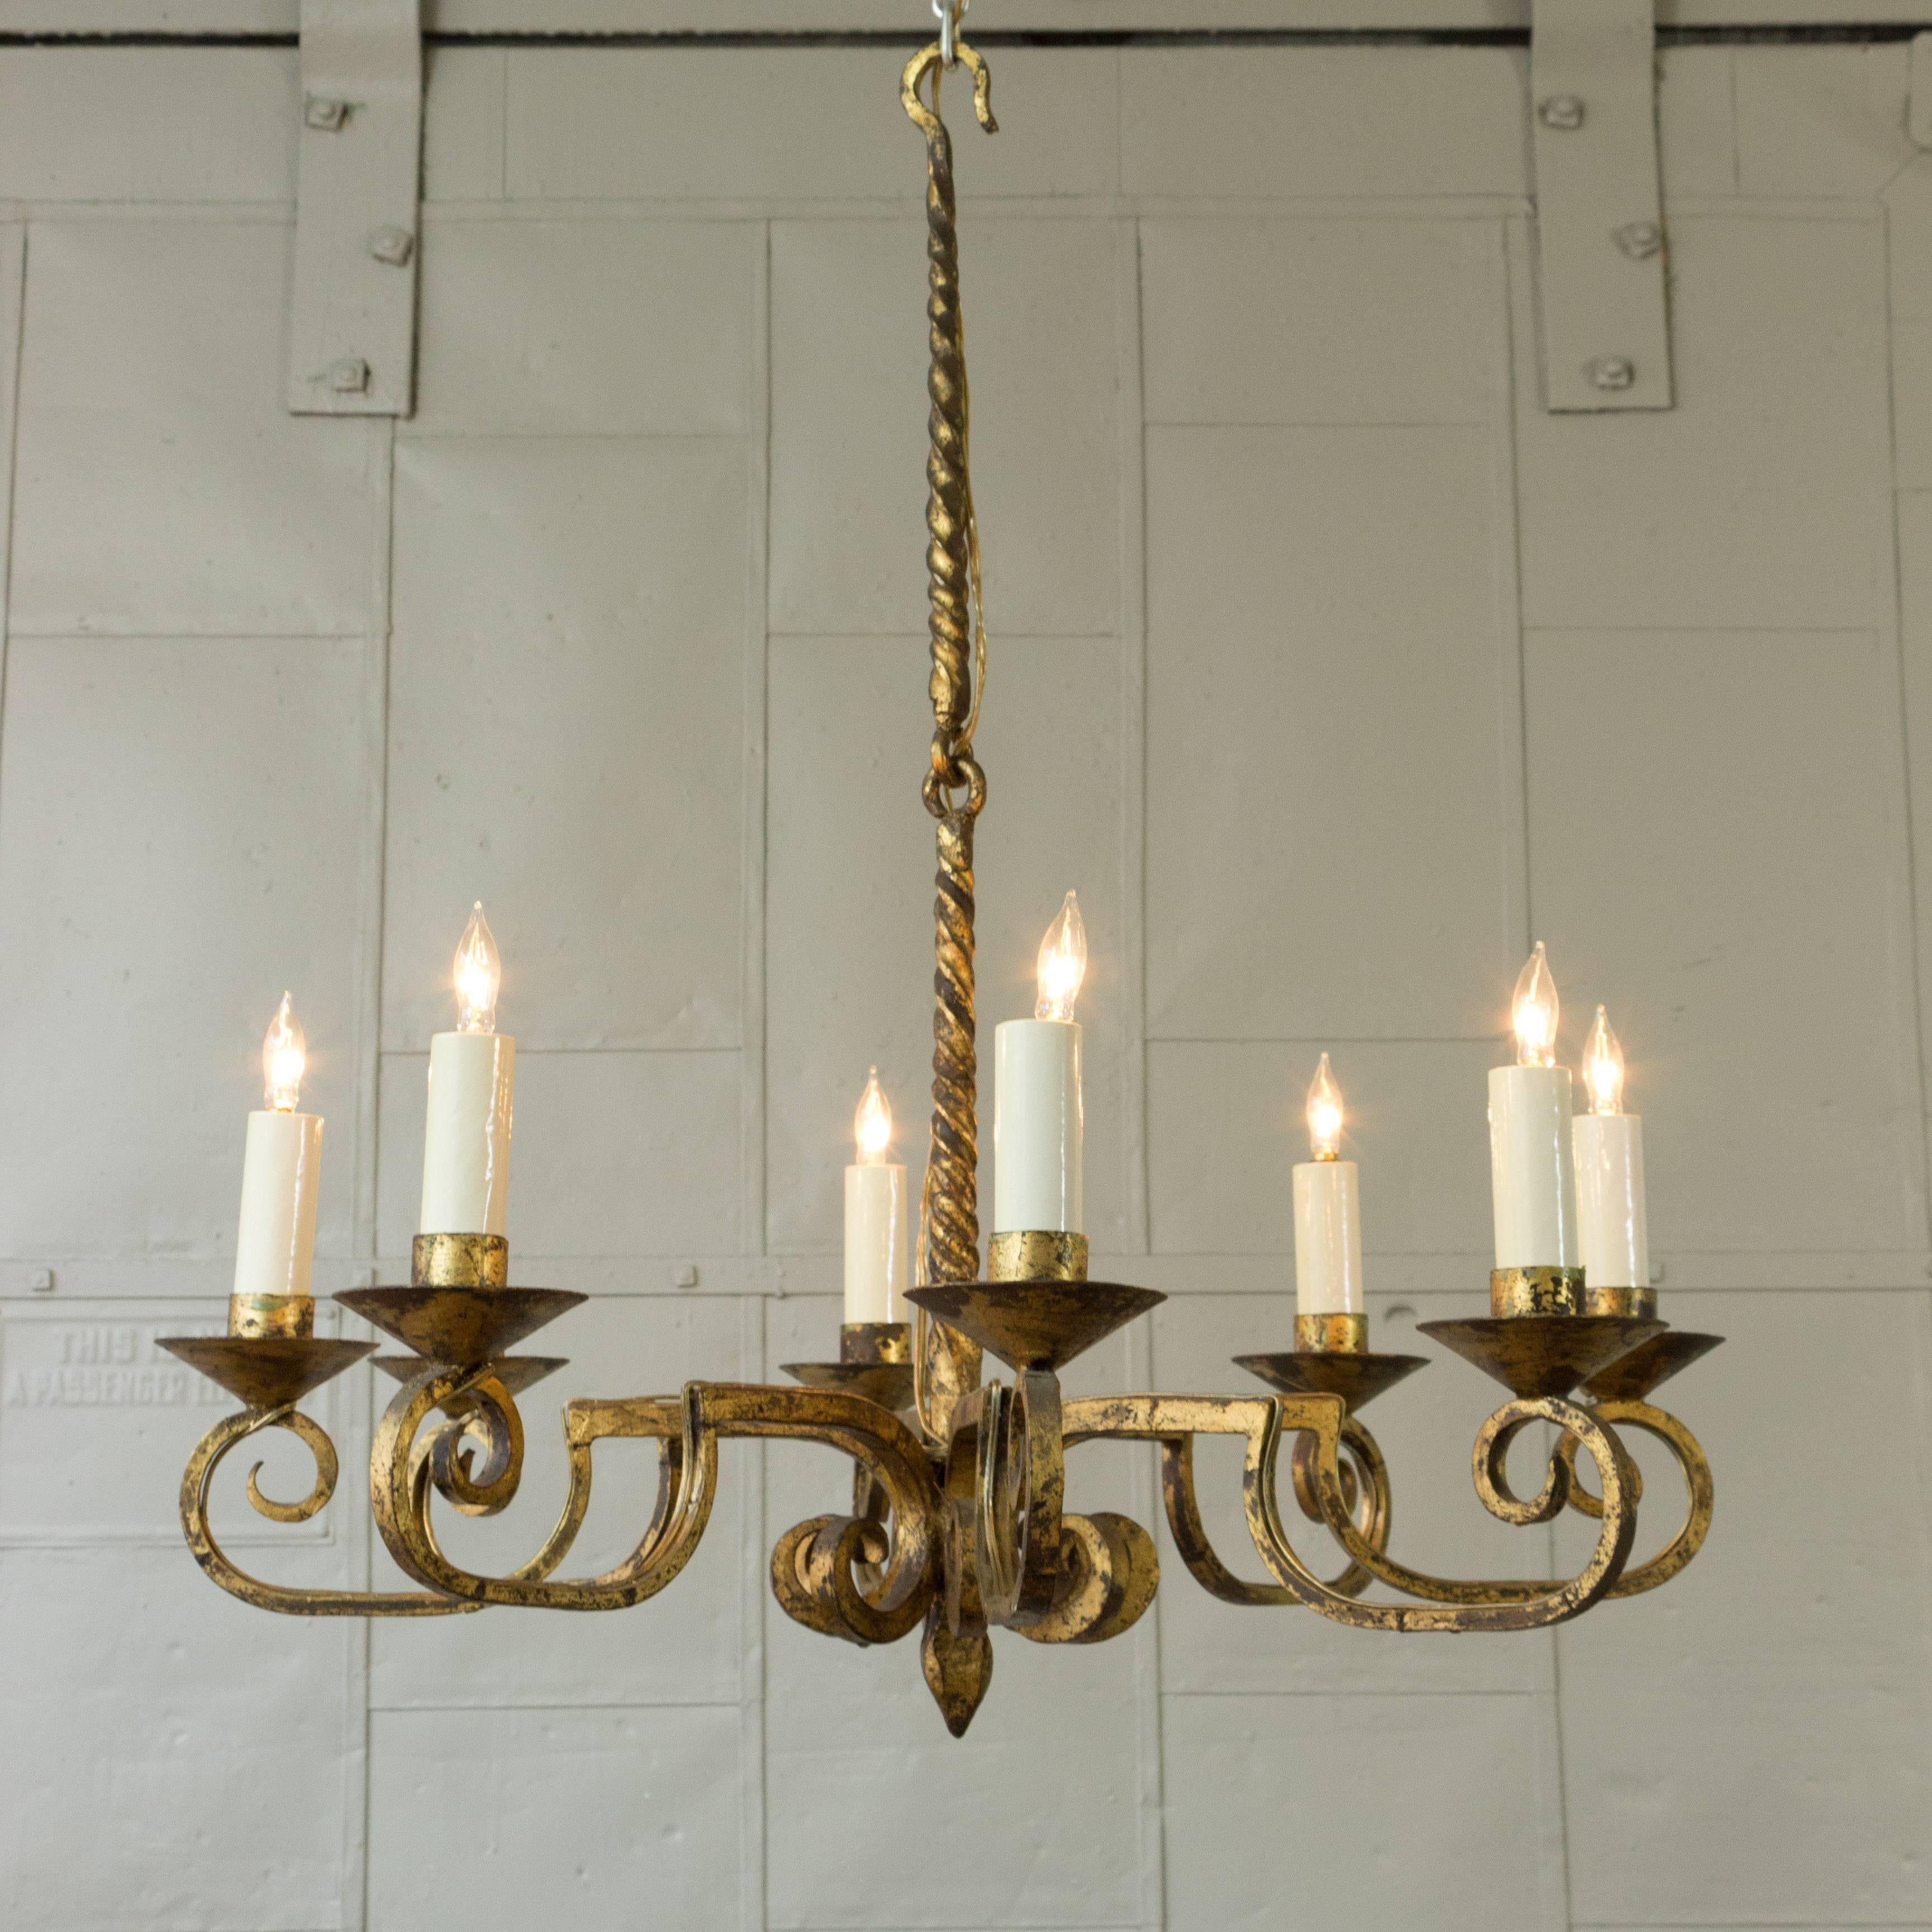 Spanish gilt wrought iron chandelier with eight arms in distressed gilt finish. 